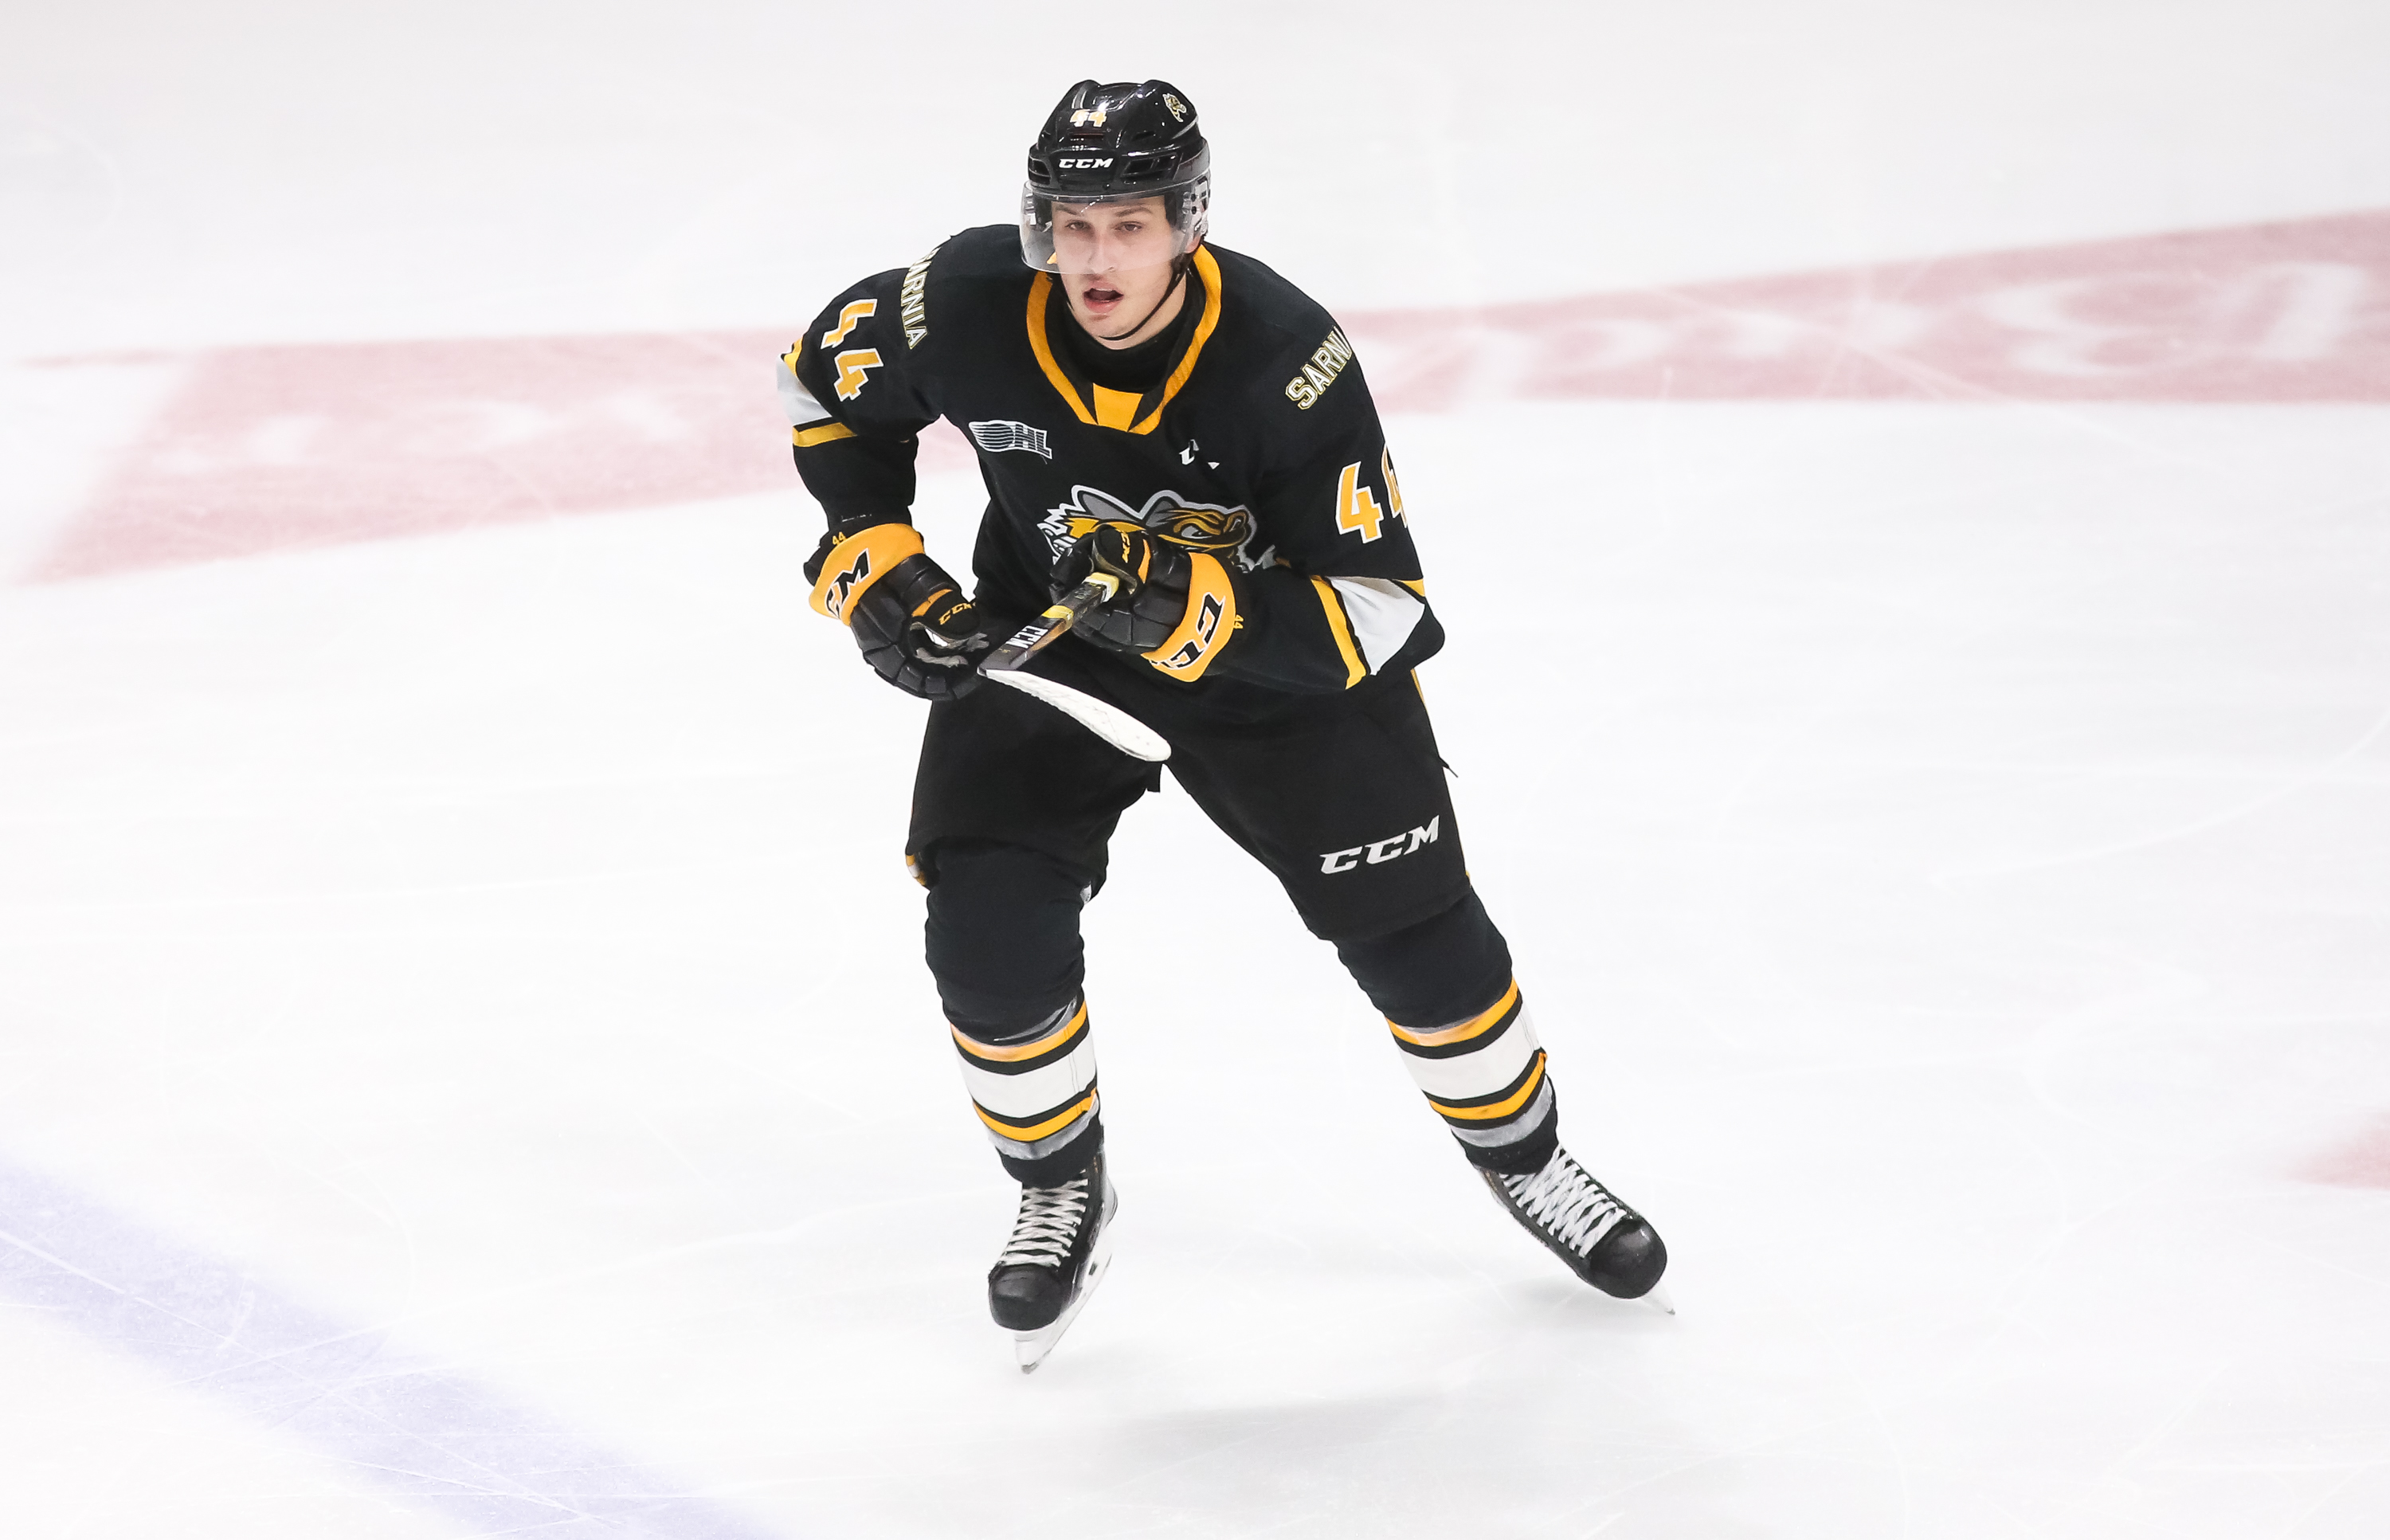 Jacob Perreault #44 of the Sarnia Sting skates during an OHL game against the Oshawa Generals at the Tribute Communities Centre on October 18, 2019 in Oshawa, Ontario, Canada.